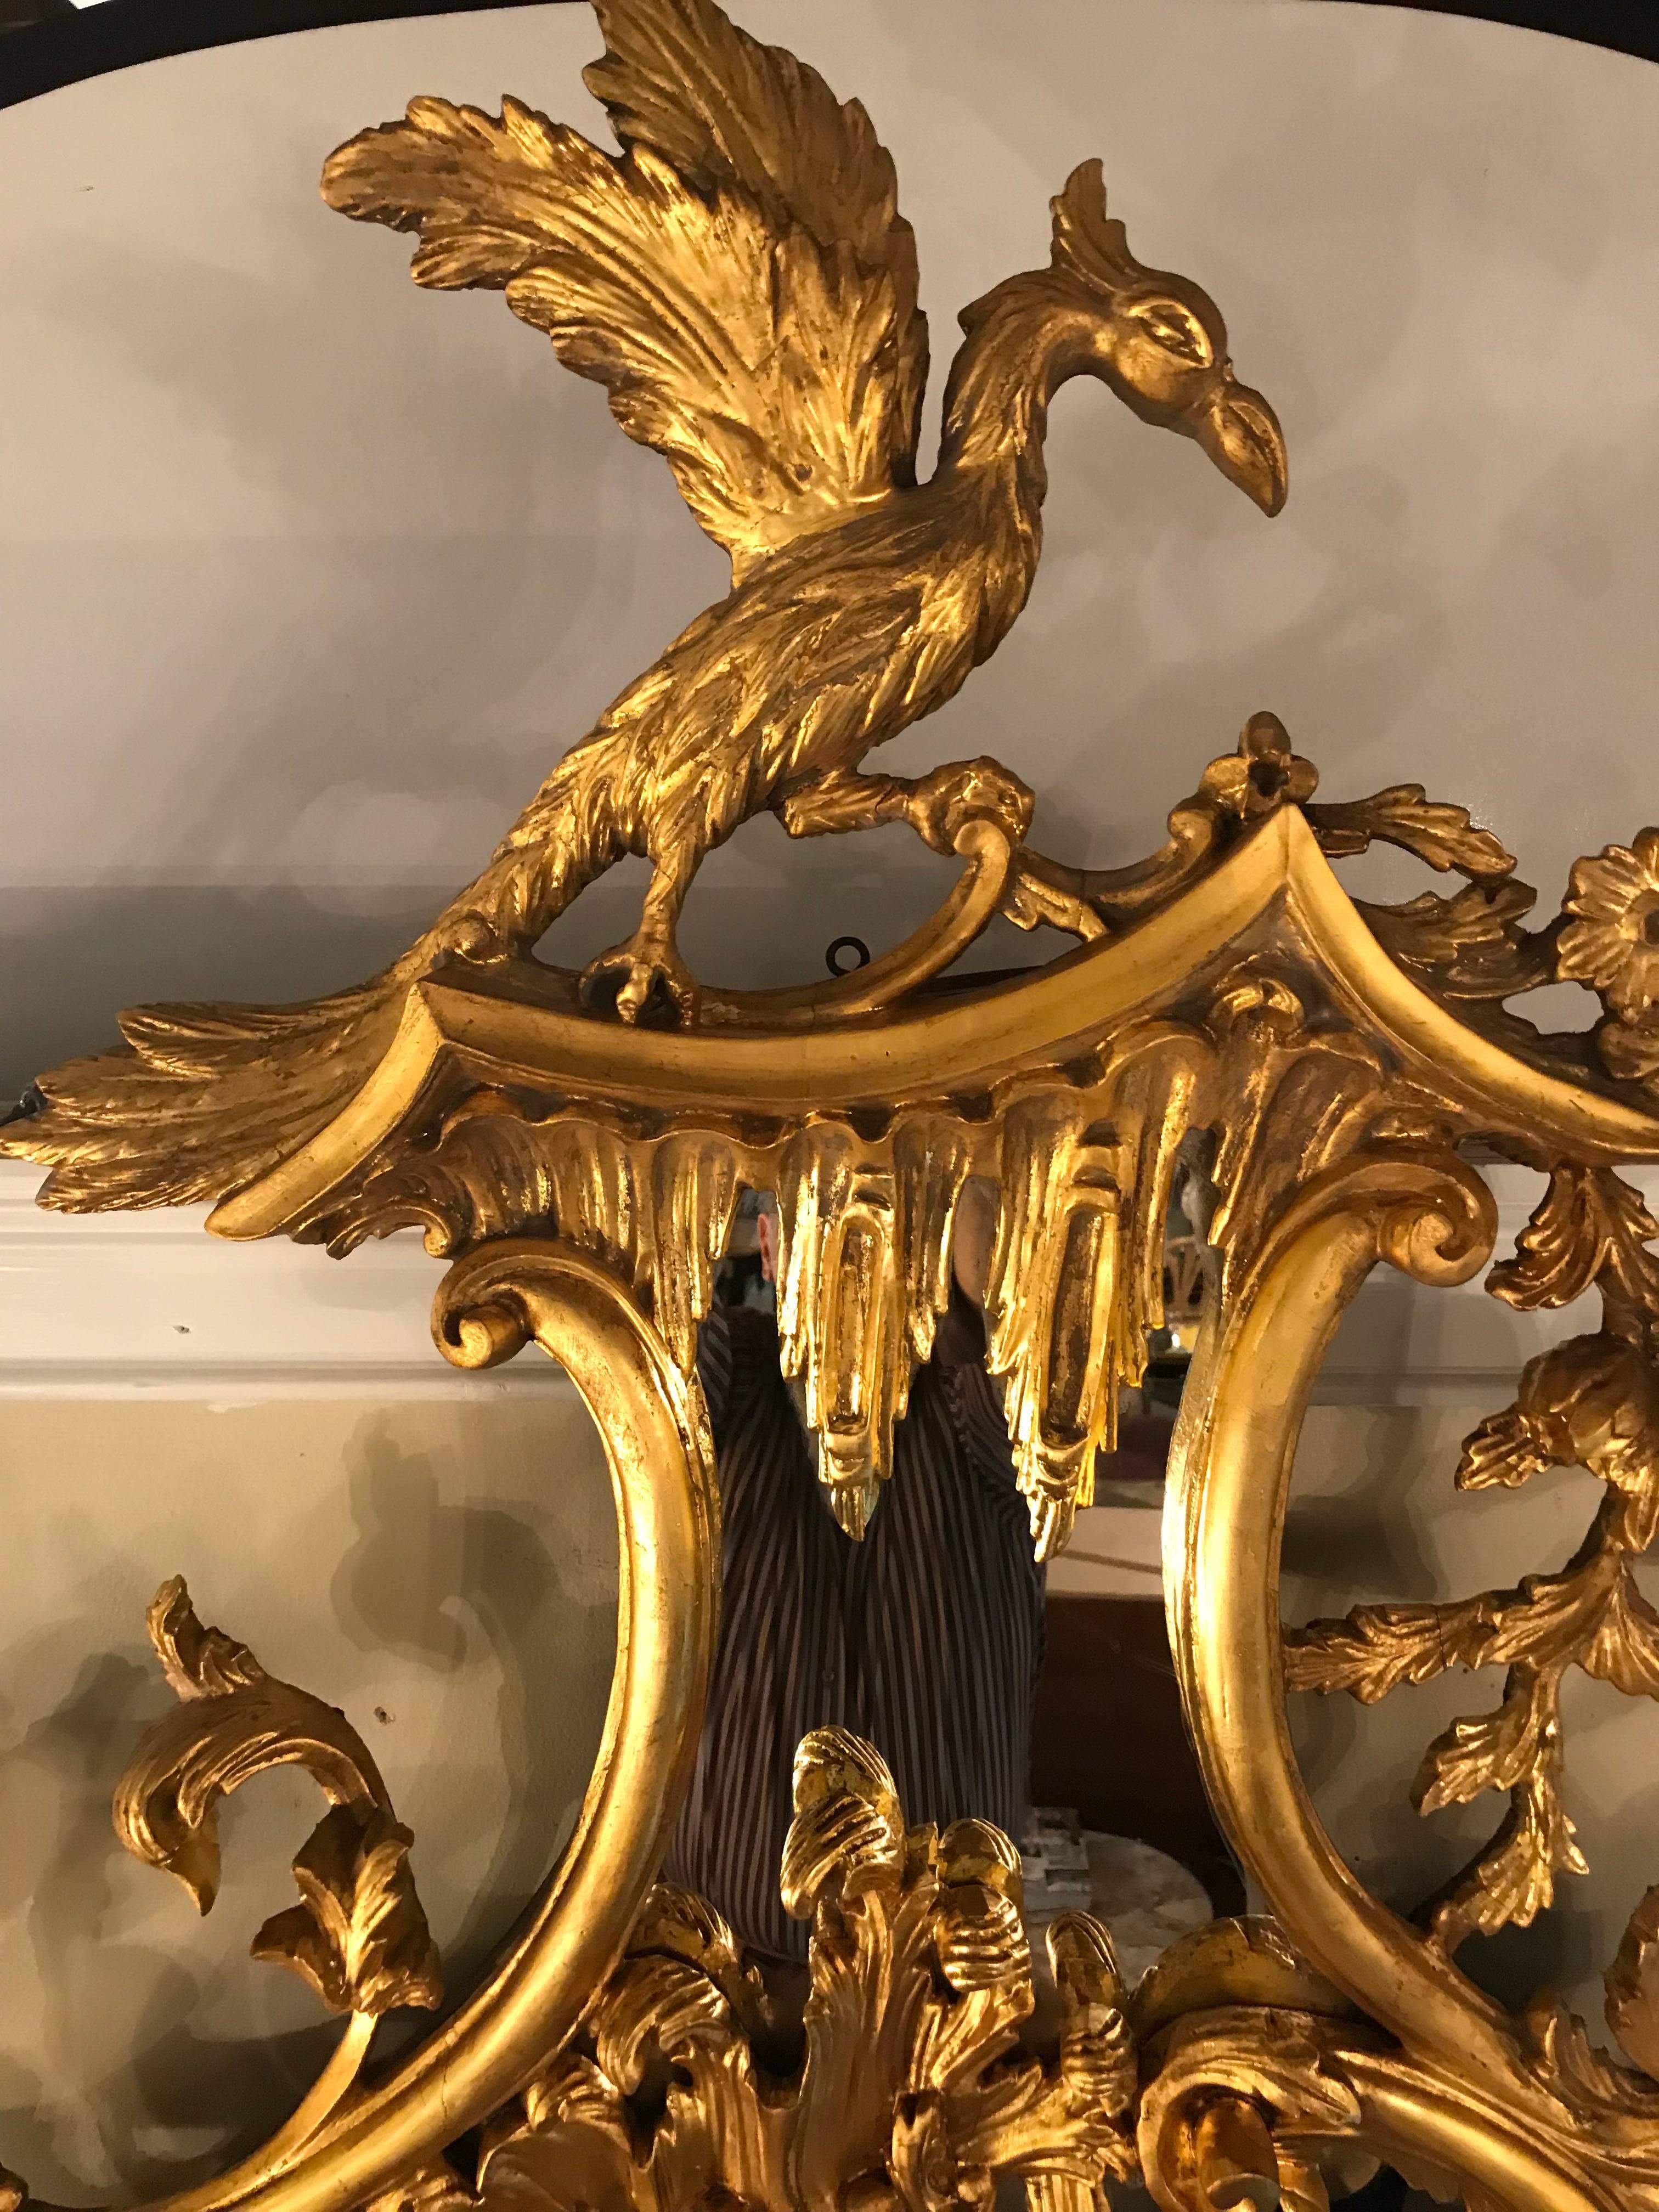 A pair of Palatial George II style giltwood wall or console mirrors. Each mirror set in a wood frame that is gilt gold decorated. Both having wonderful pediment tops depicting winged phoenix's along with foliate leaf and vine decorations. The centre